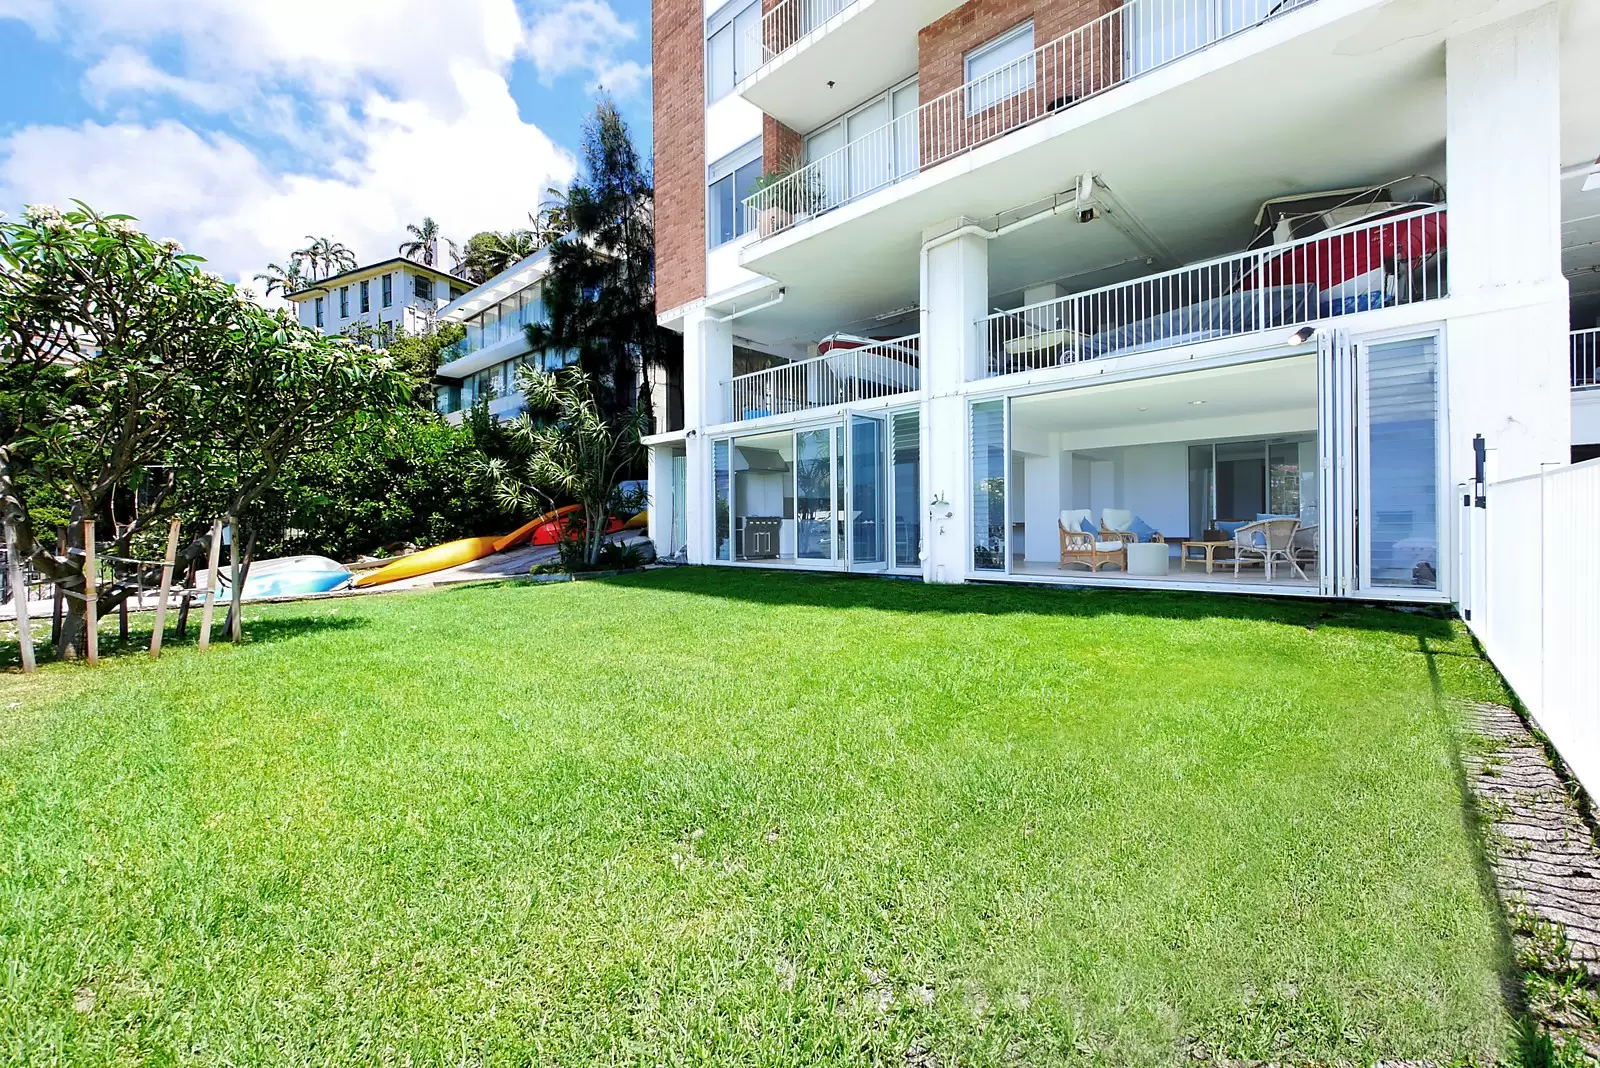 Photo #10: 95/35a Sutherland Crescent, Darling Point - Sold by Sydney Sotheby's International Realty